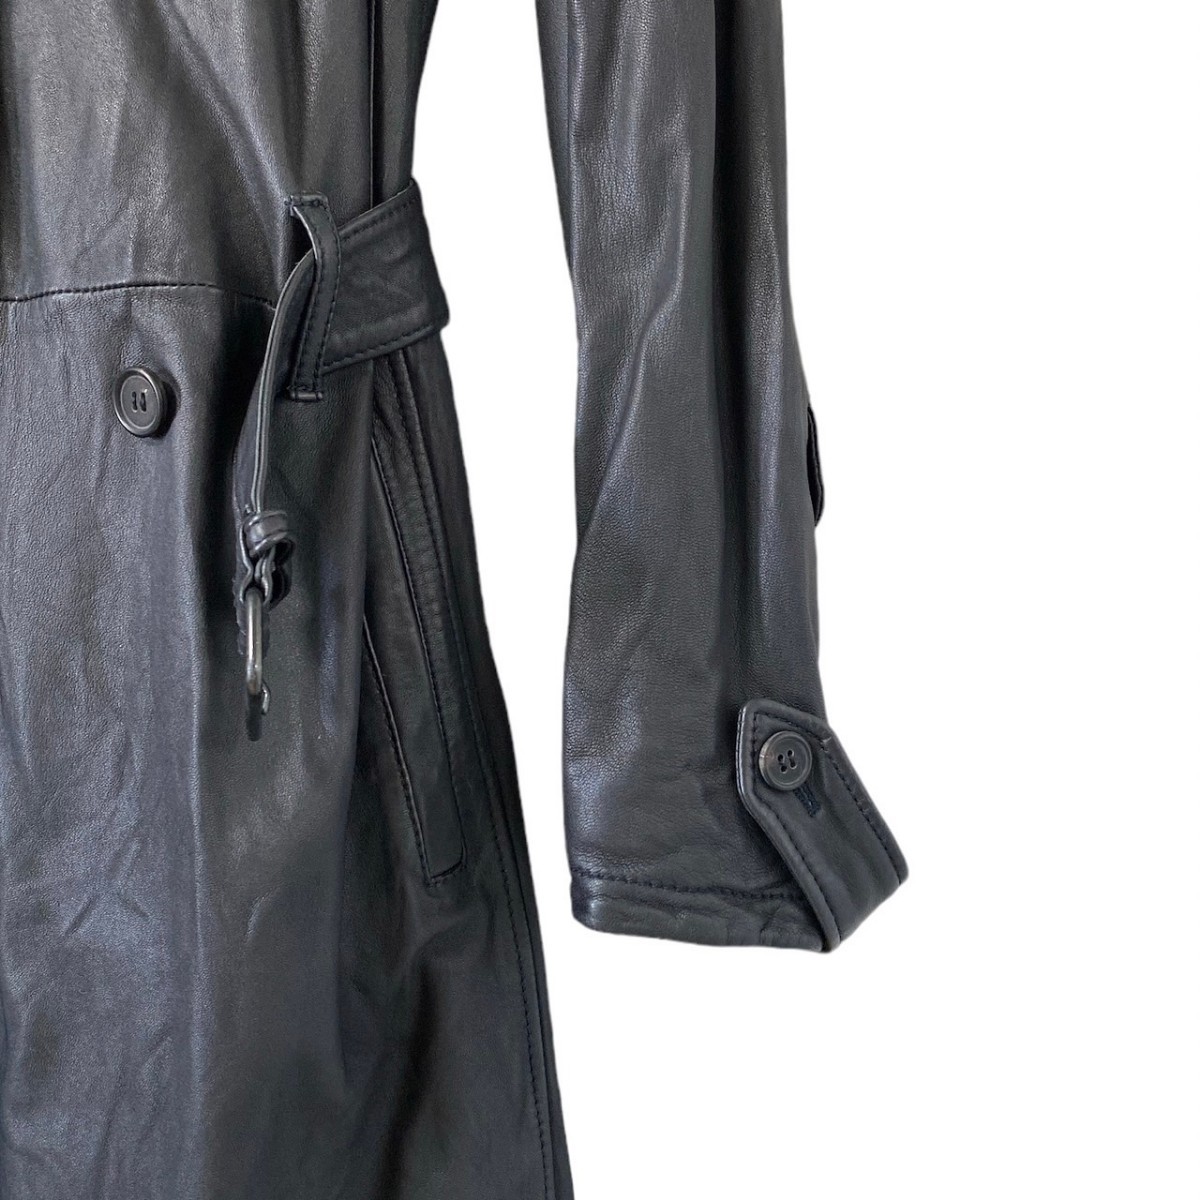  almost unused Neil Barrett leather trench coat coat sheep leather S size Italy made black 23L08